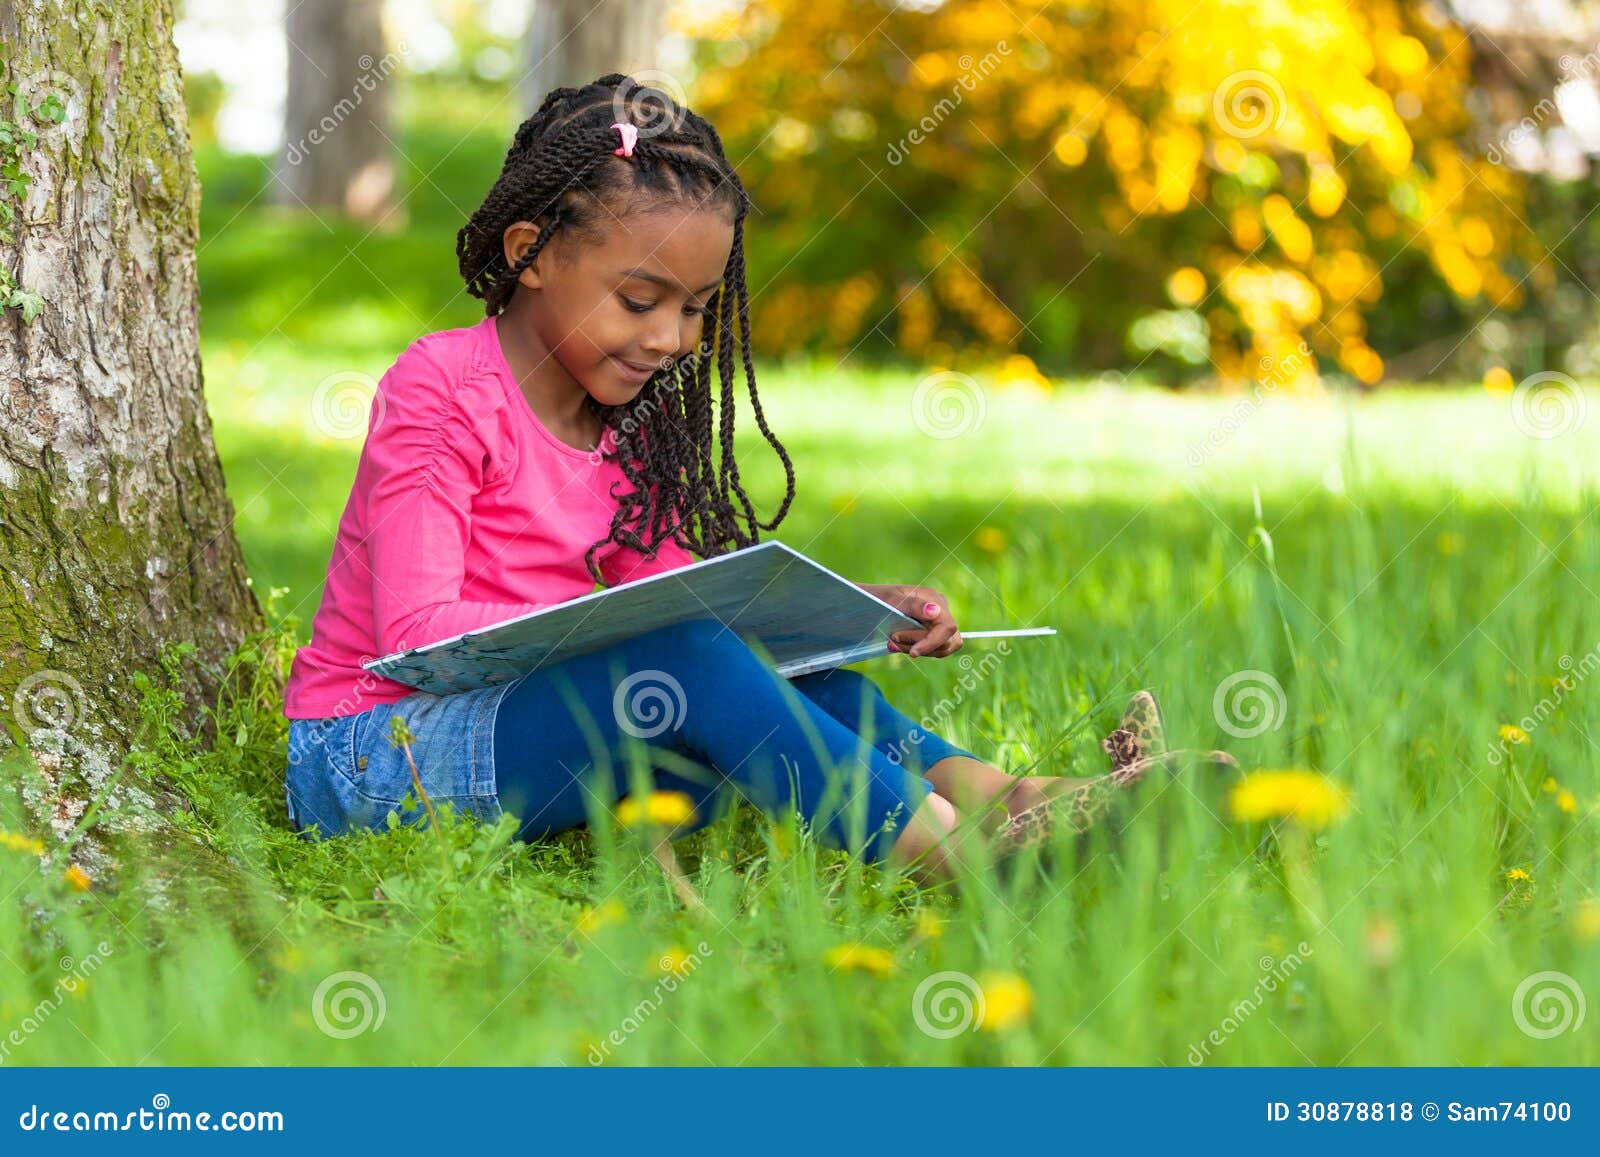 Outdoor Portrait Of A Cute Young Black Little Girl Reading A Boo Stock Photo Image Of Fresh